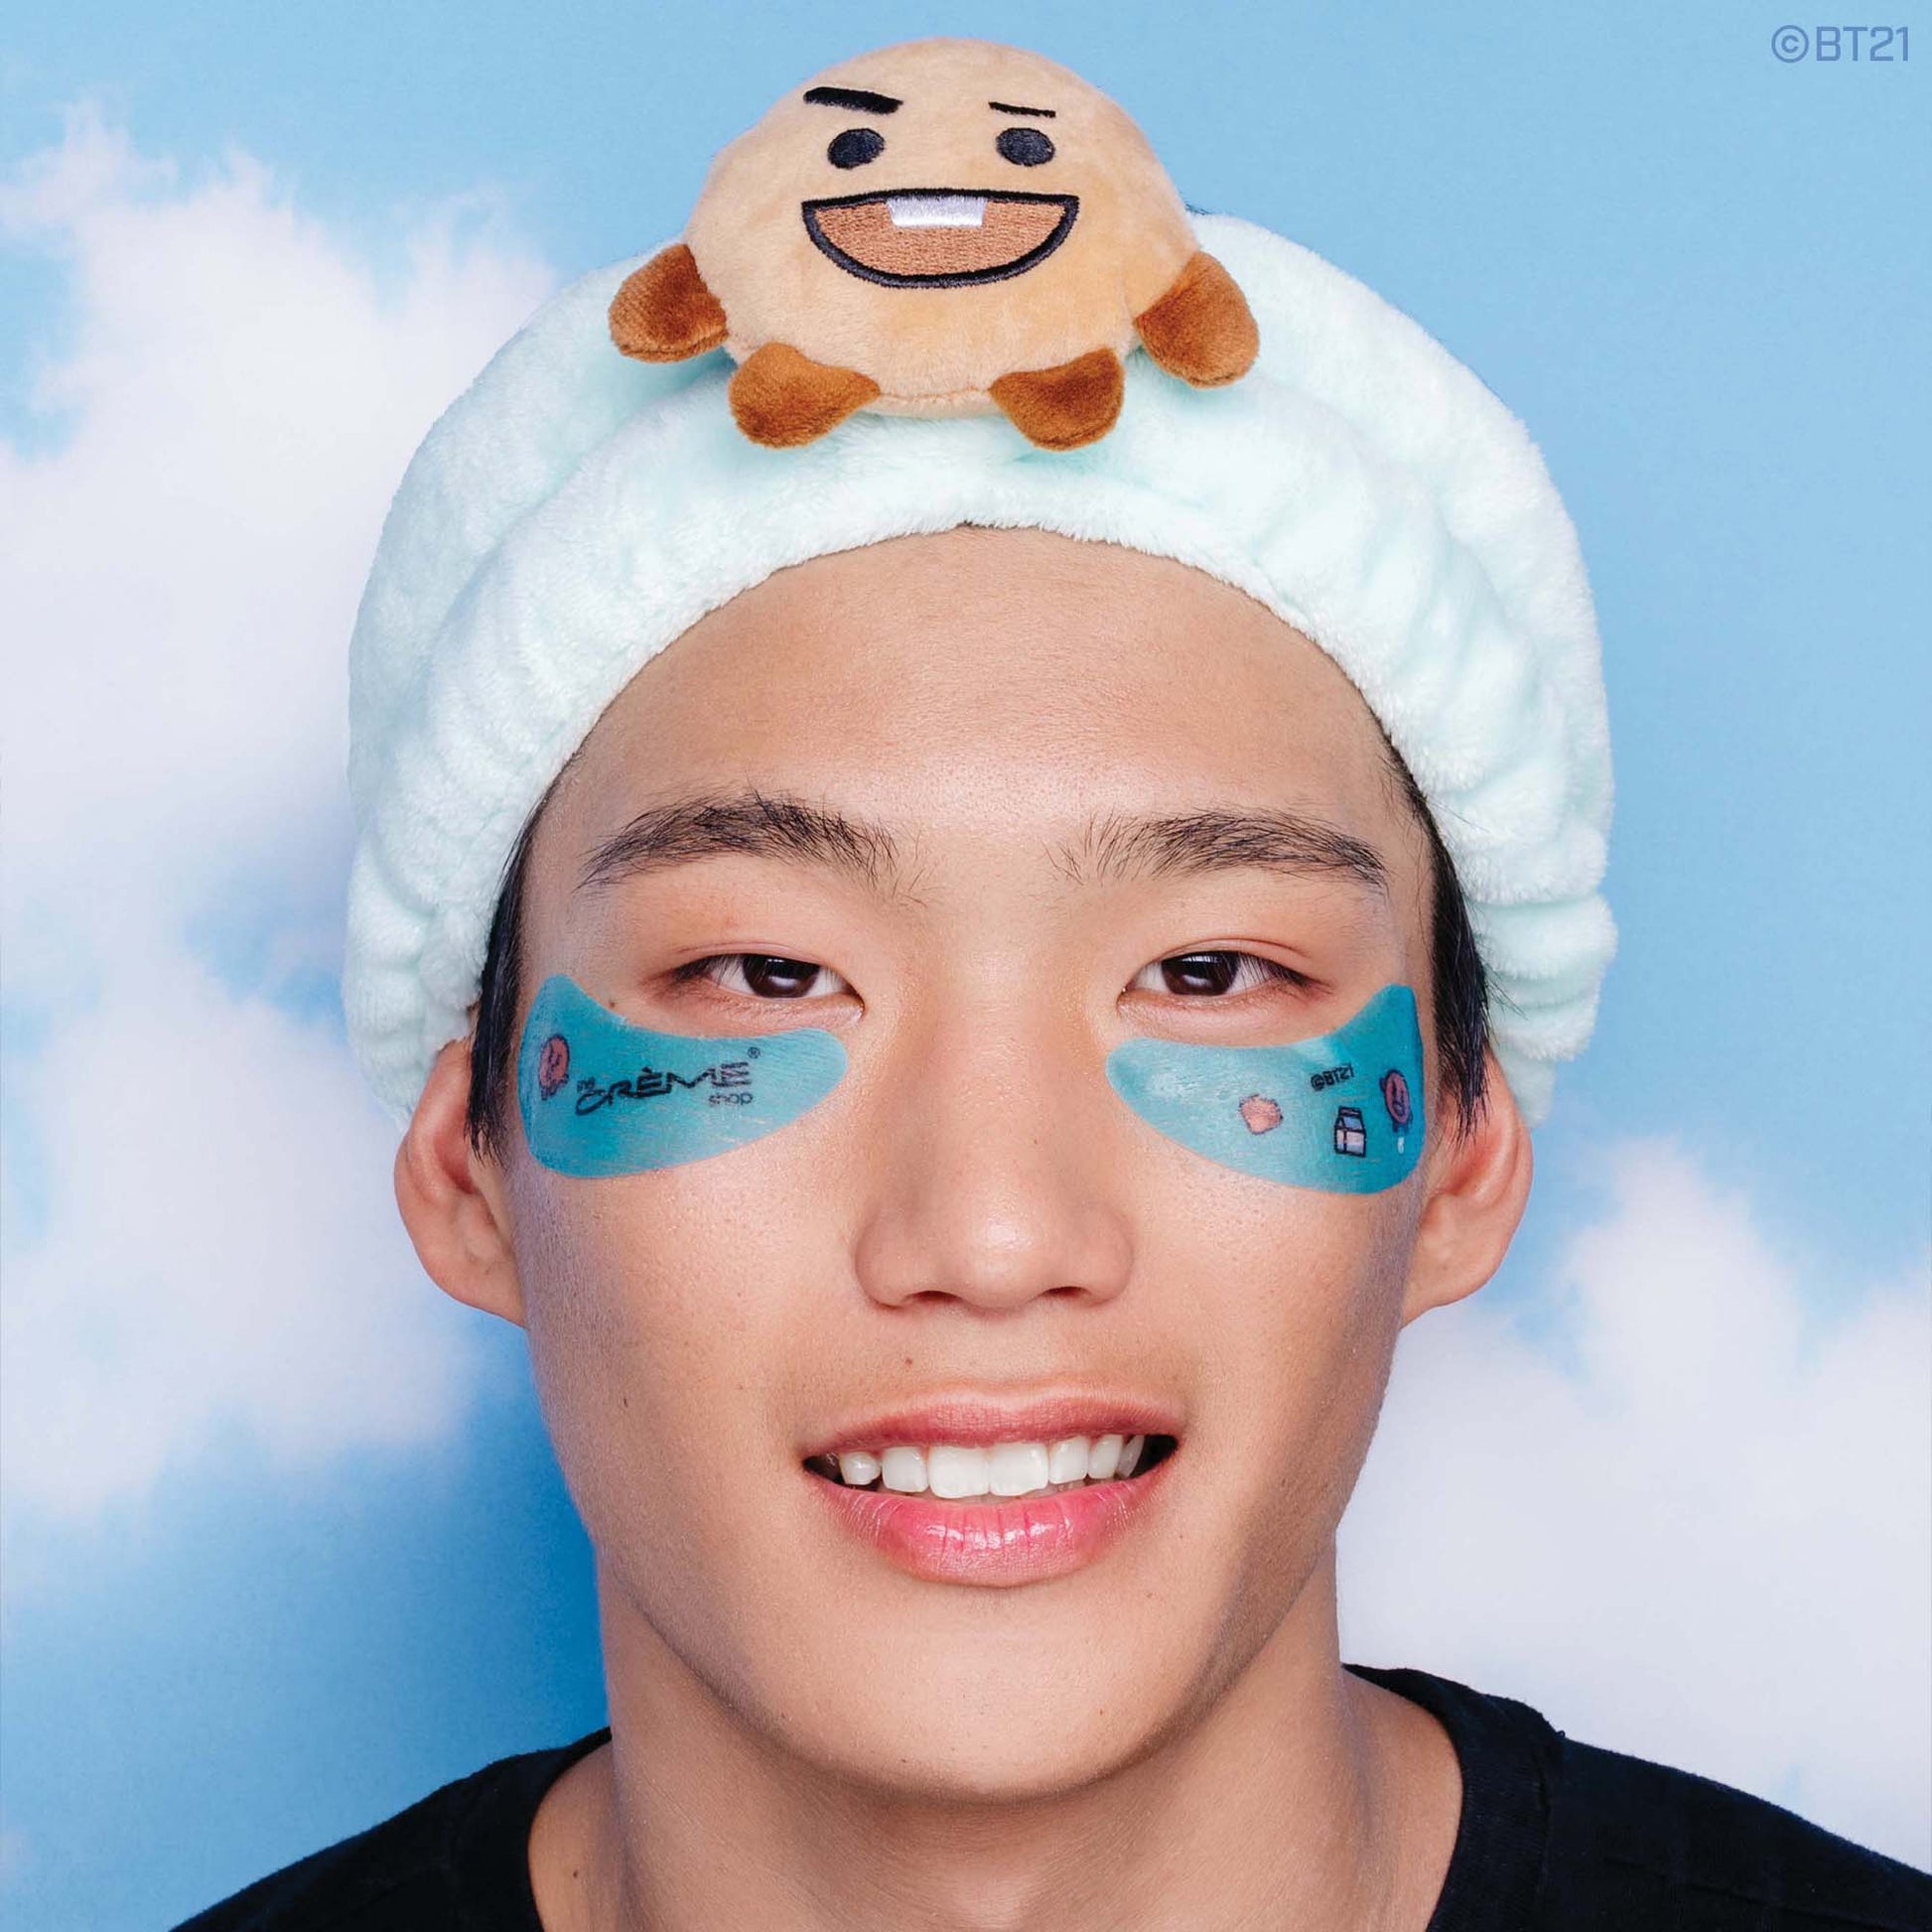 “Brightest Day!” SHOOKY Hydrogel Under Eye Patches | Lifting & Toning Under Eye Patches The Crème Shop x BT21 